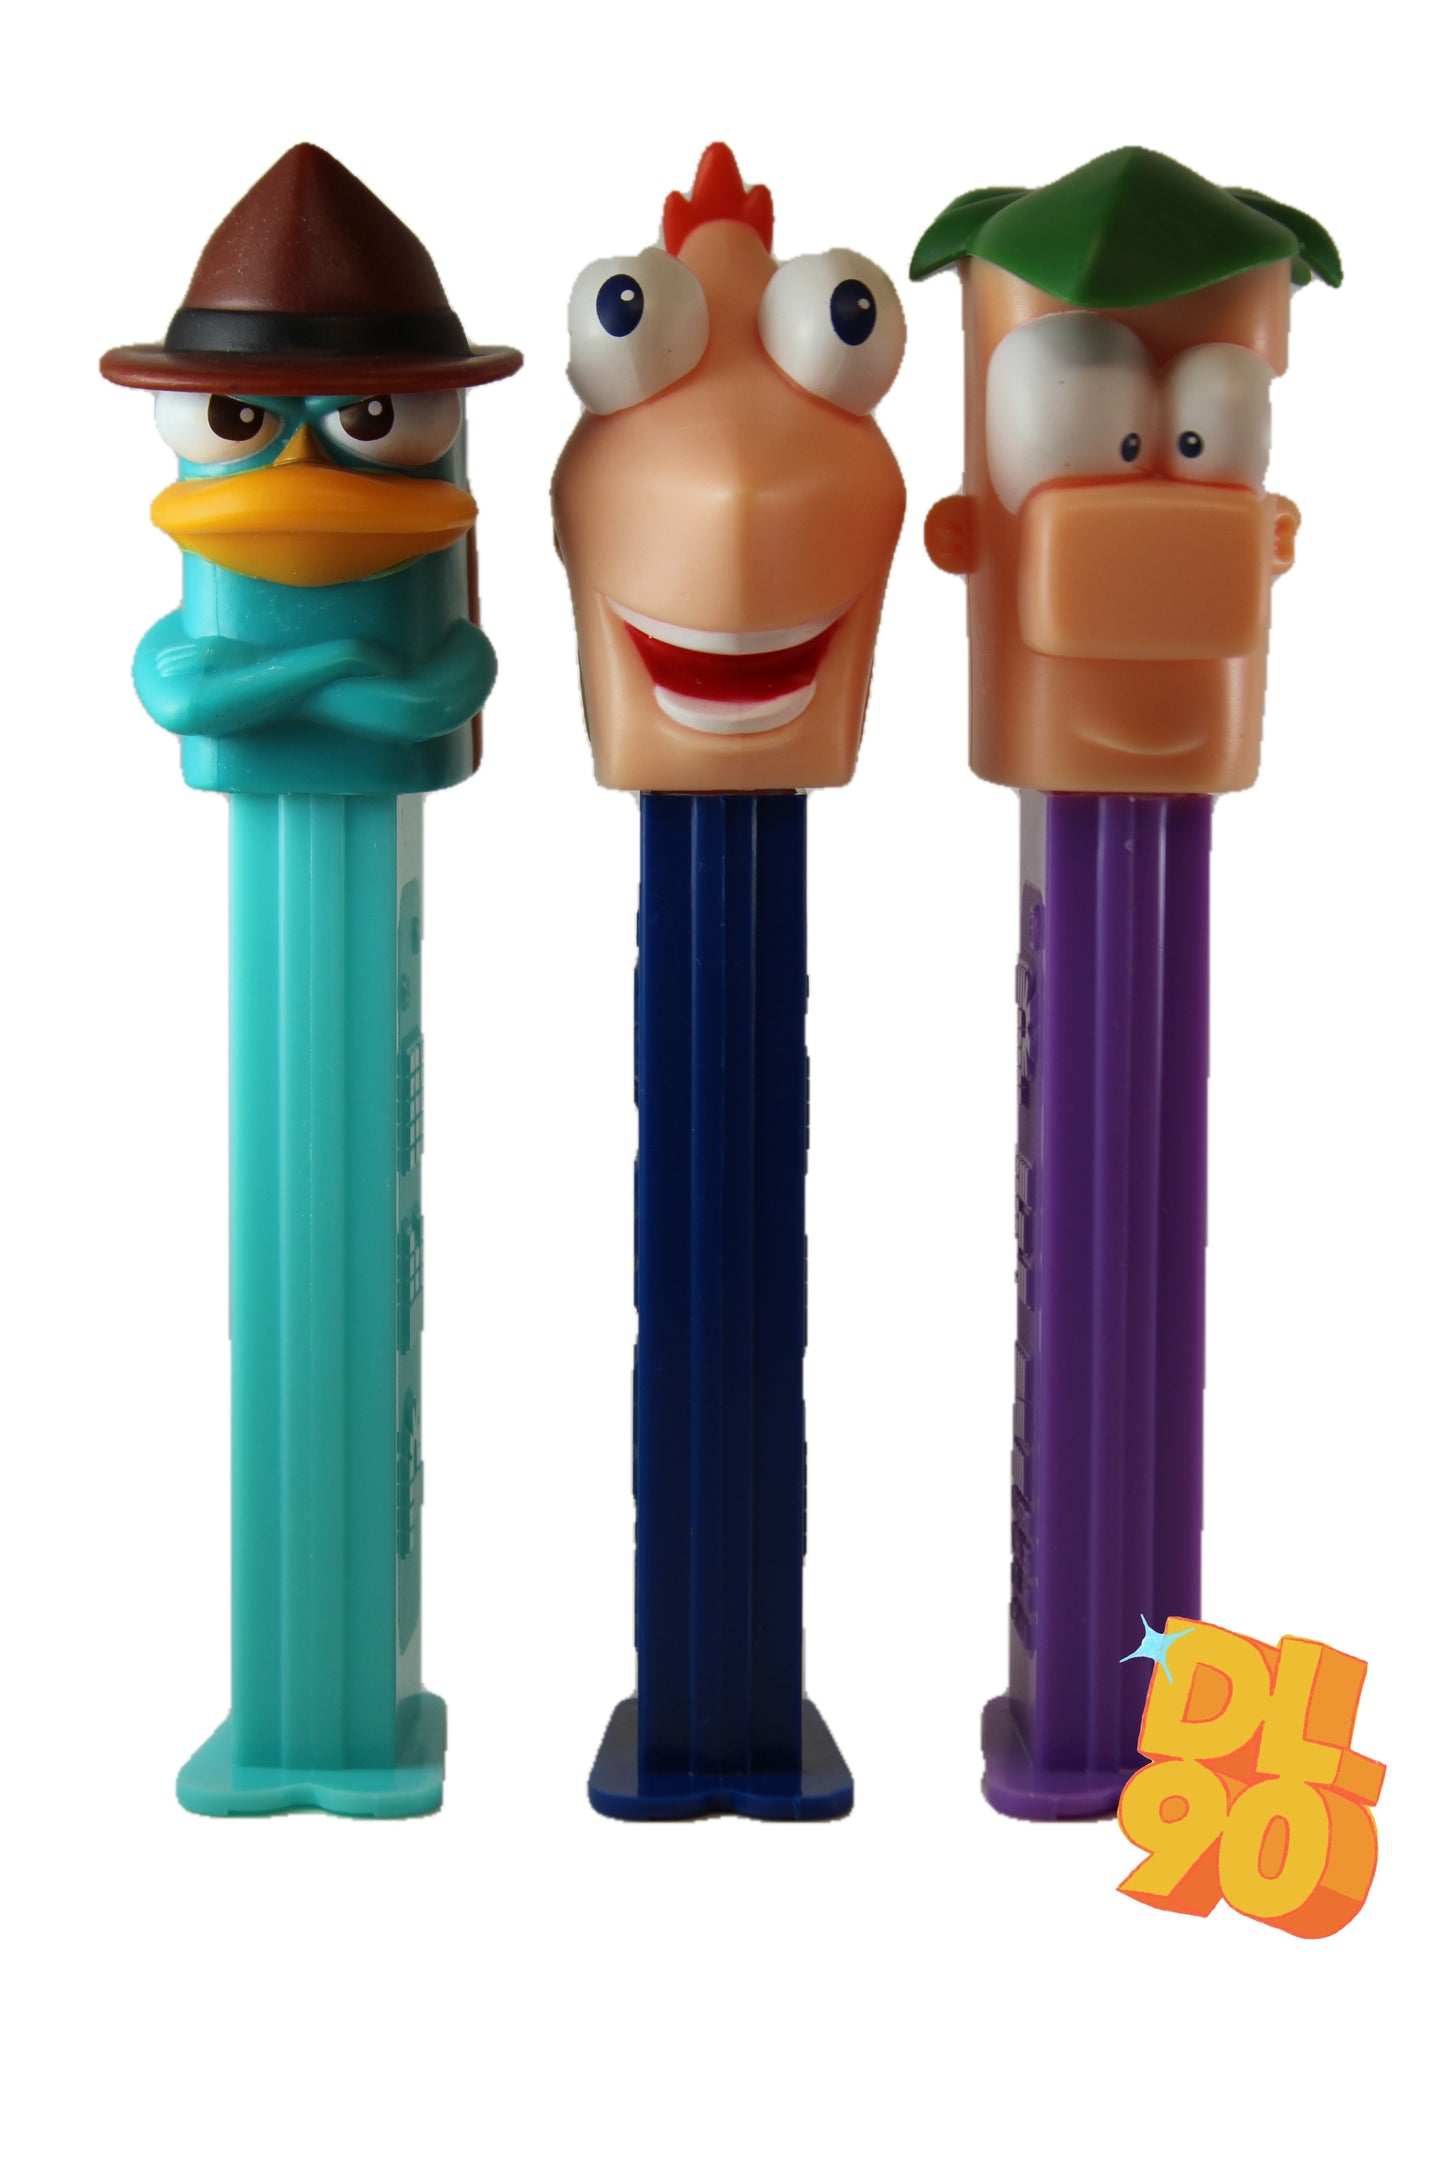 Phineas, Ferb and Perry the Platypus, Disney, LOOSE